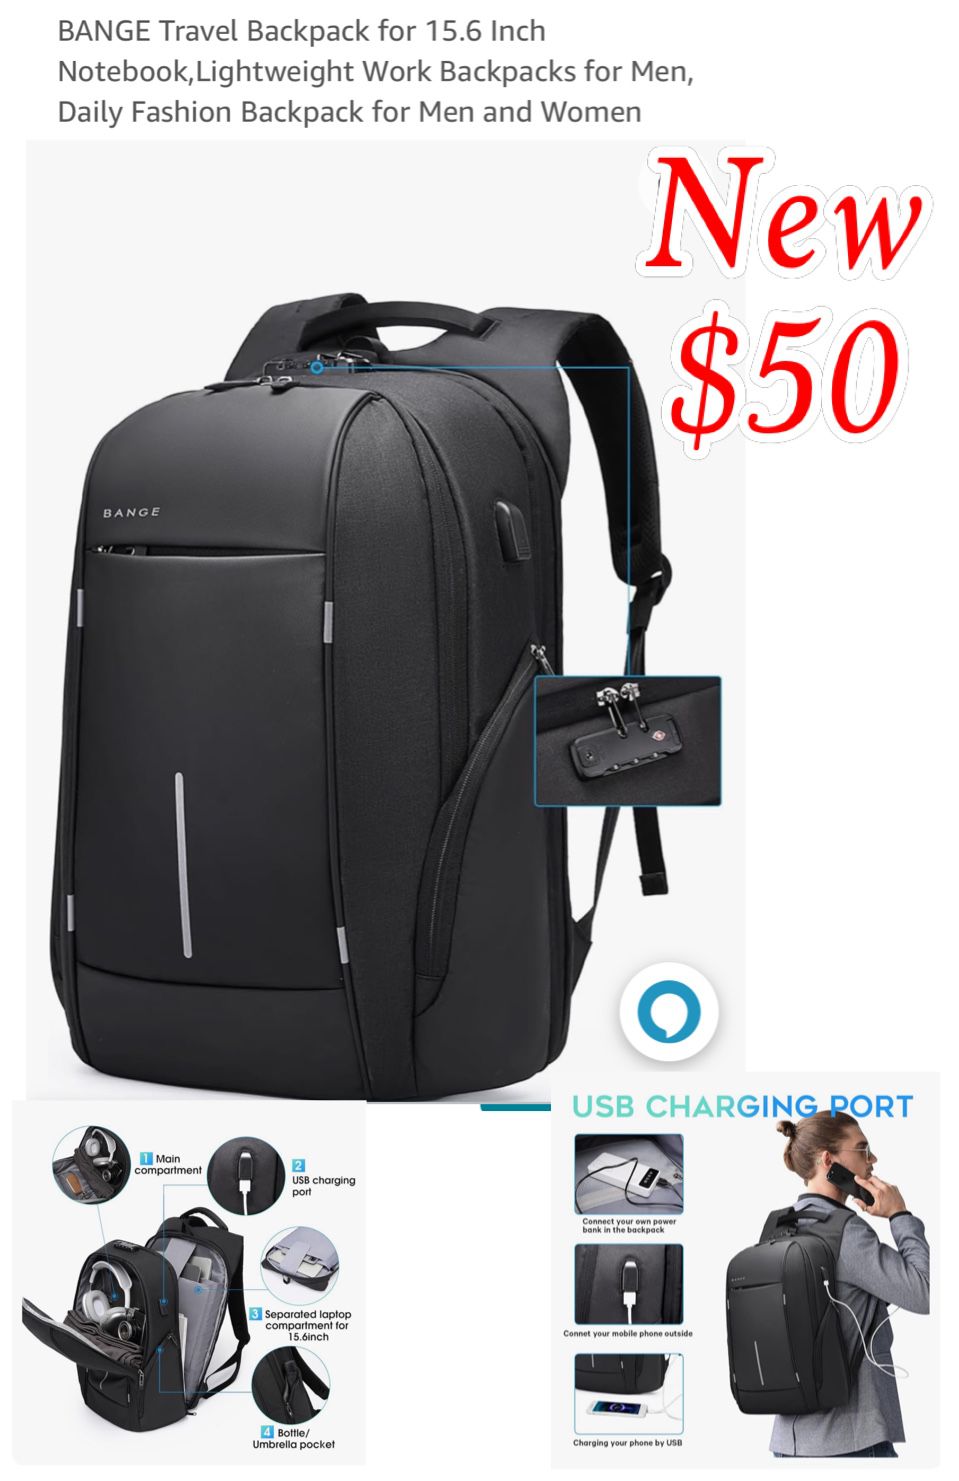 New BANGE Travel Backpack for 15.6 Inch Notebook,Lightweight Work Backpacks for Men, Daily Fashion Backpack for Men and Women$50